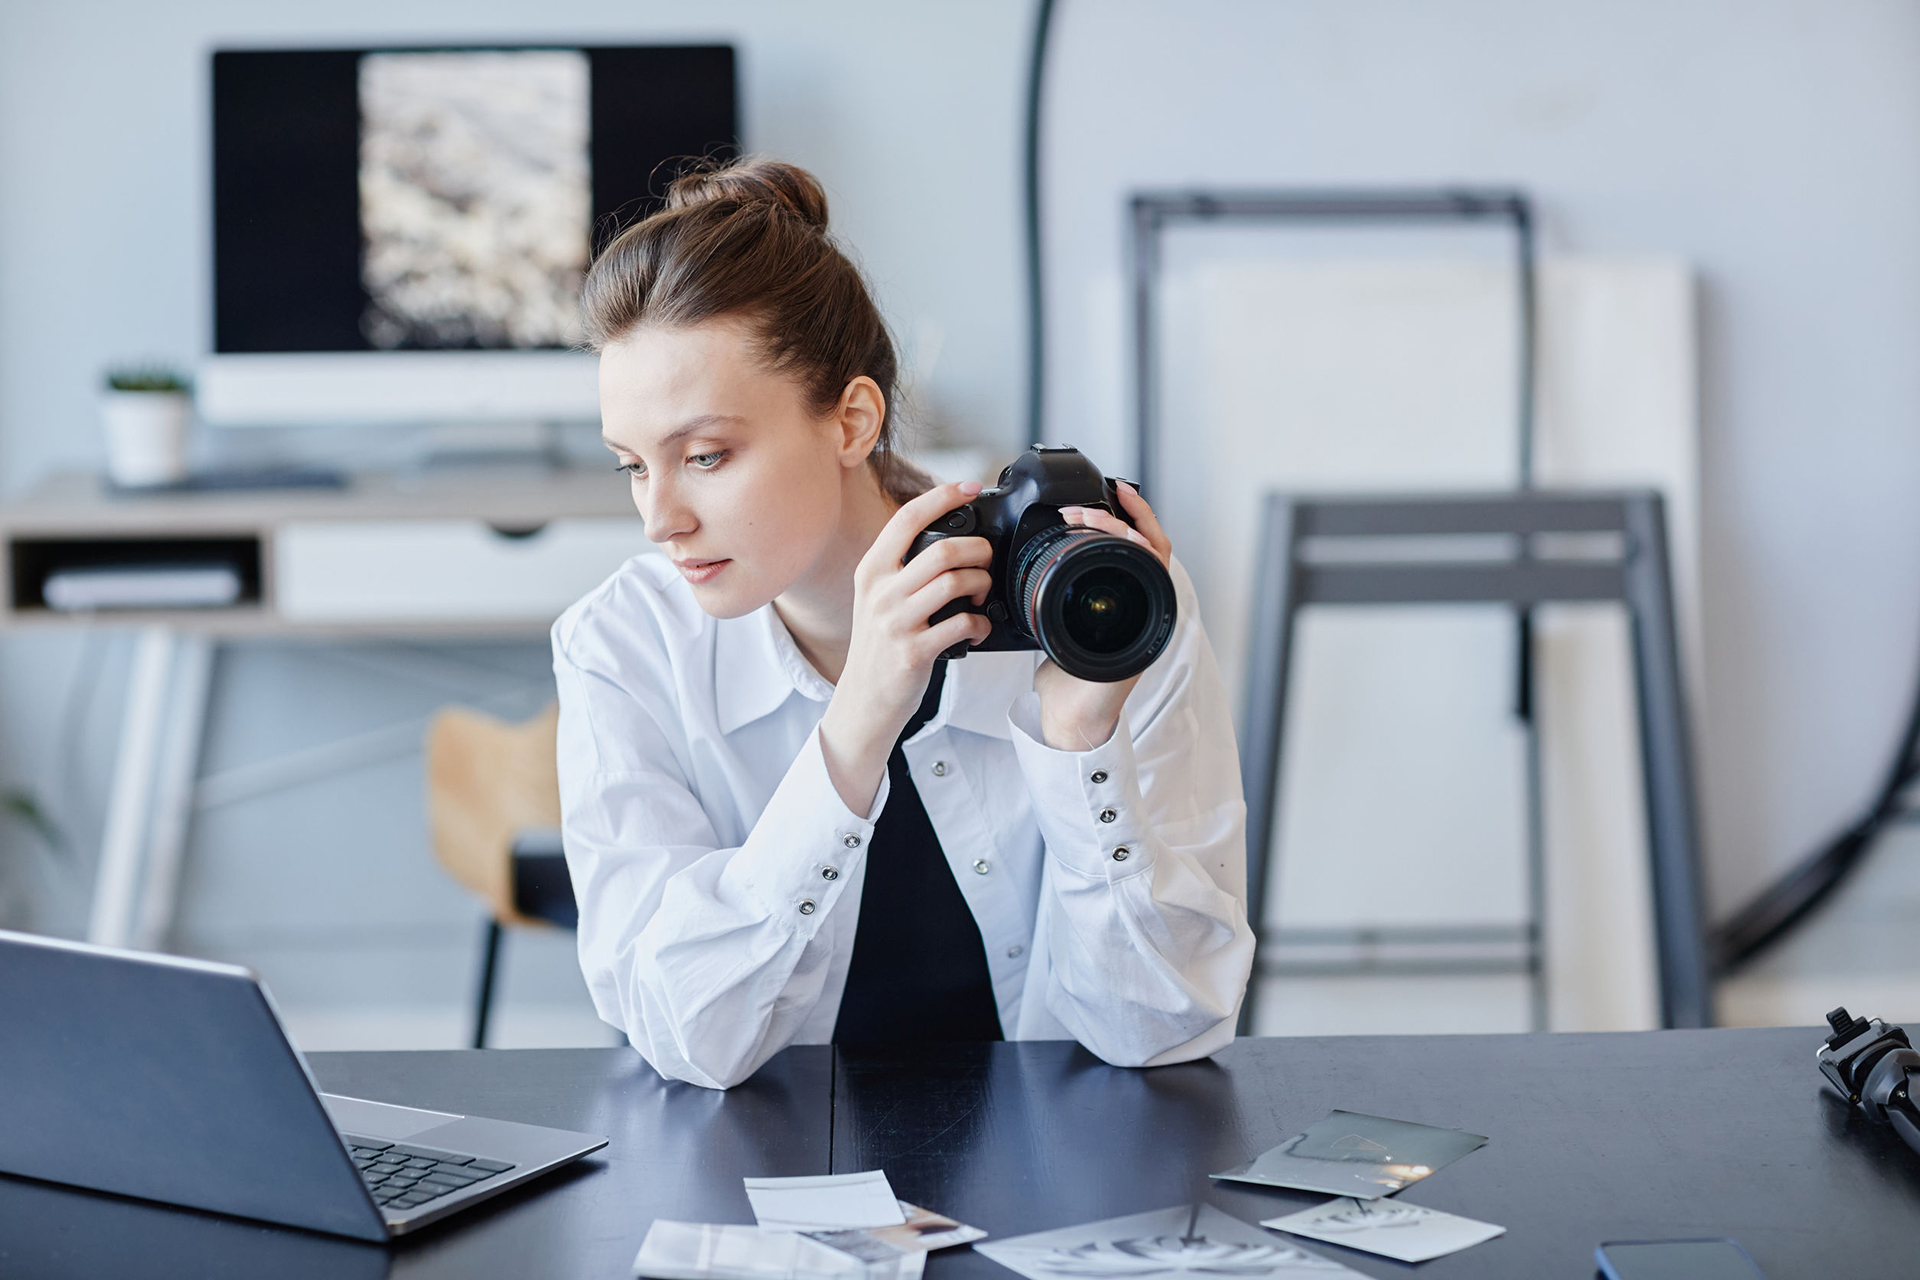 Portrait of young female photographer using laptop and photo camera in minimal studio setting, copy space